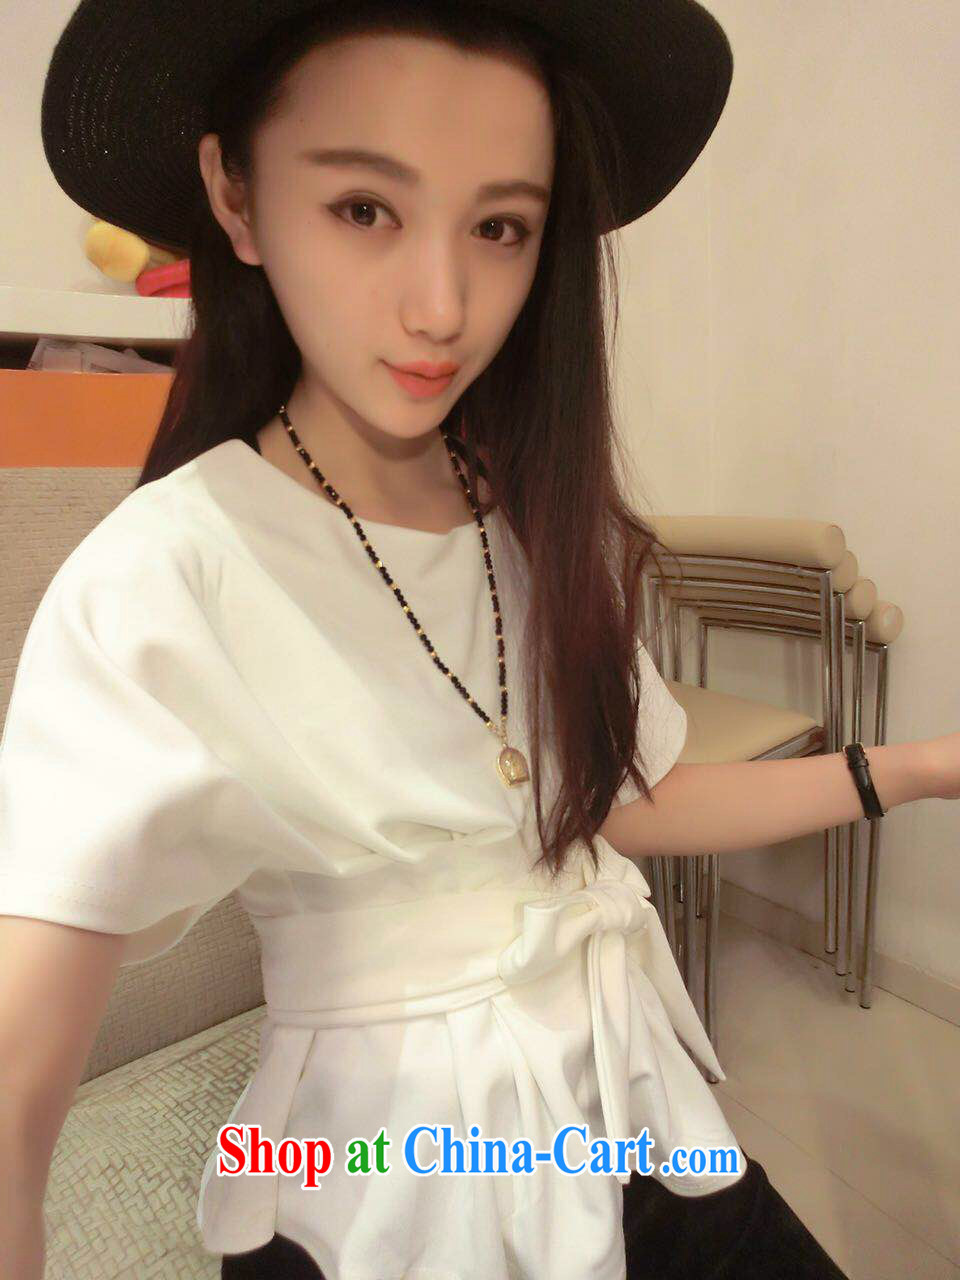 Chow honey honey 2015 New Solid Color round-collar short-sleeve loose the waist straps shirt BR - B 2033 - 206 white are code, Selina CHOW honey honey (YIMIMI), online shopping